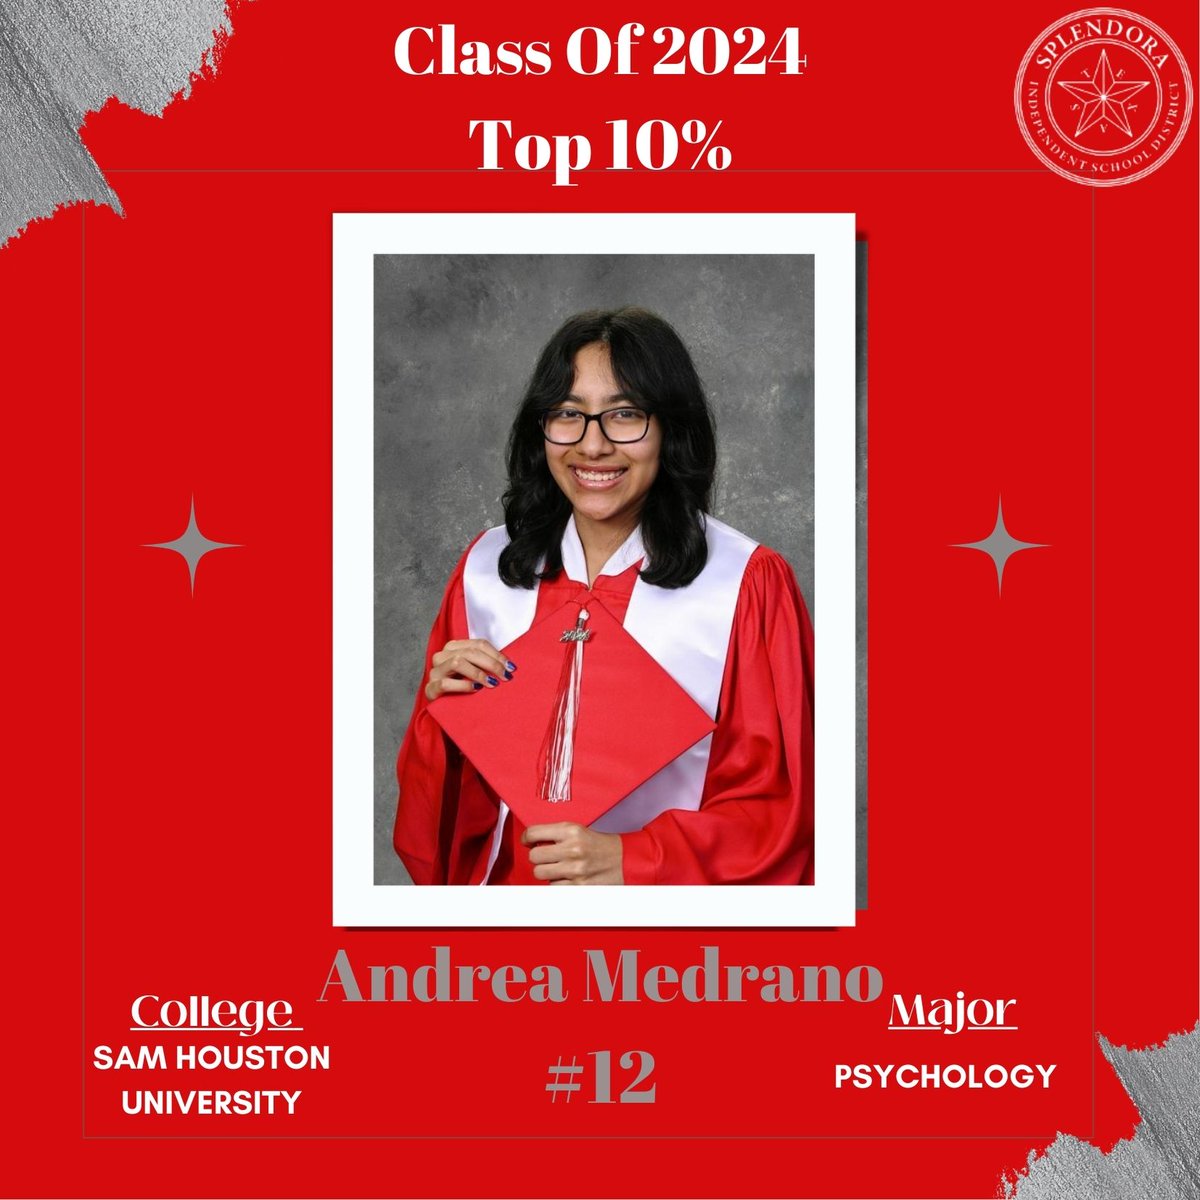 We would like to congratulate each student in the top 10 percent of the graduating 2024 class. We are very proud of their academic accomplishments. We will be counting down each day to celebrate each of our students' success. Congratulations, Andrea Medrano - #12